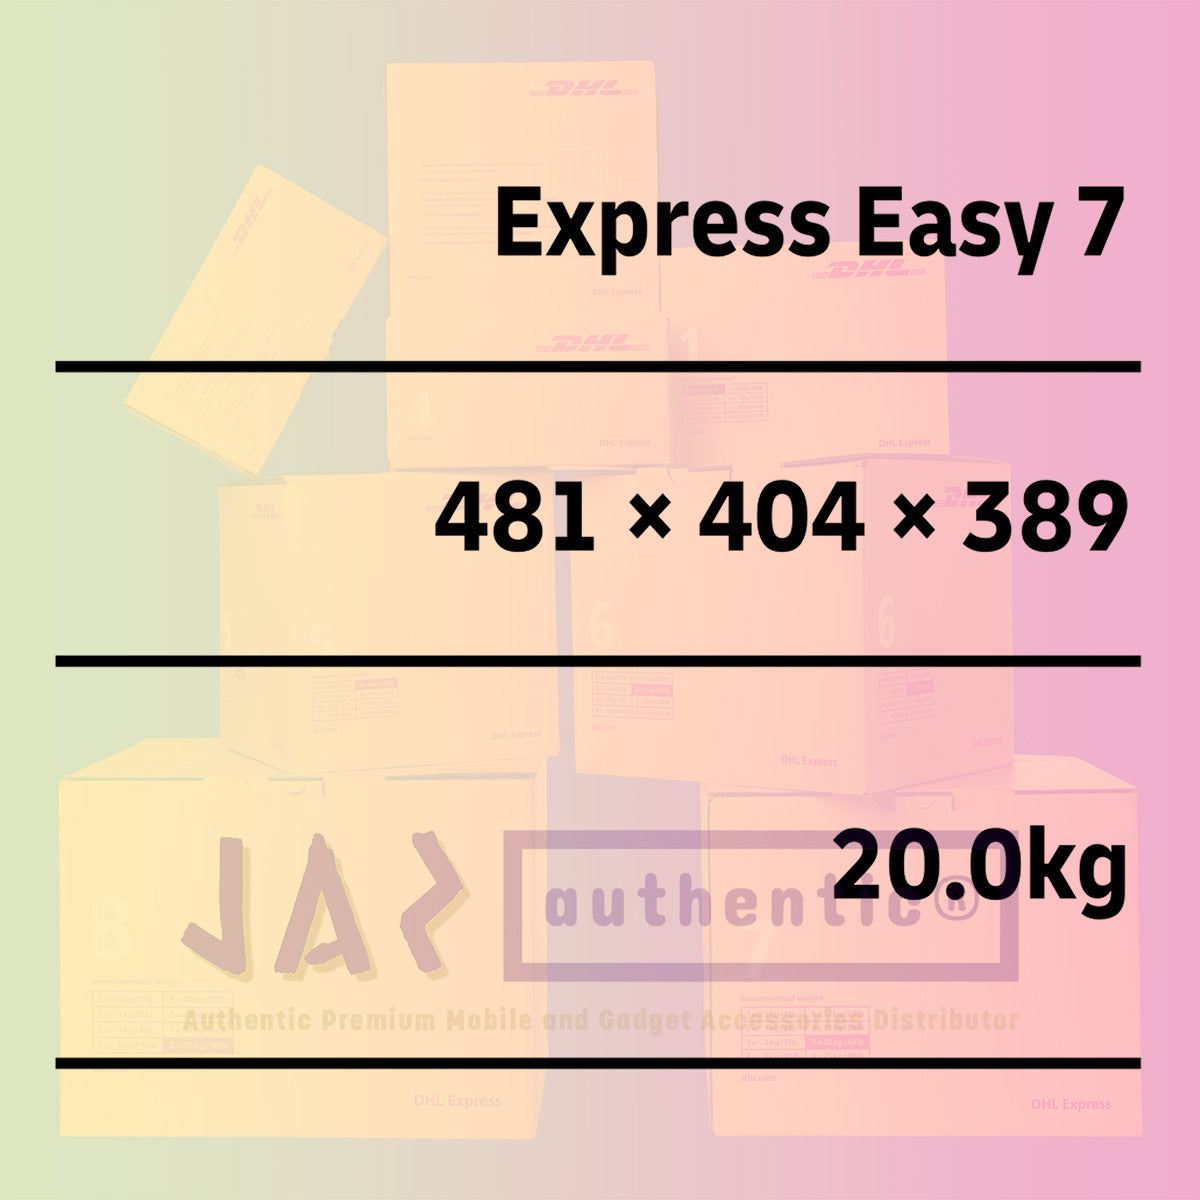 DHL Express Easy Singapore to Overseas Delivery Service, Zone 4 (United States, Europe)